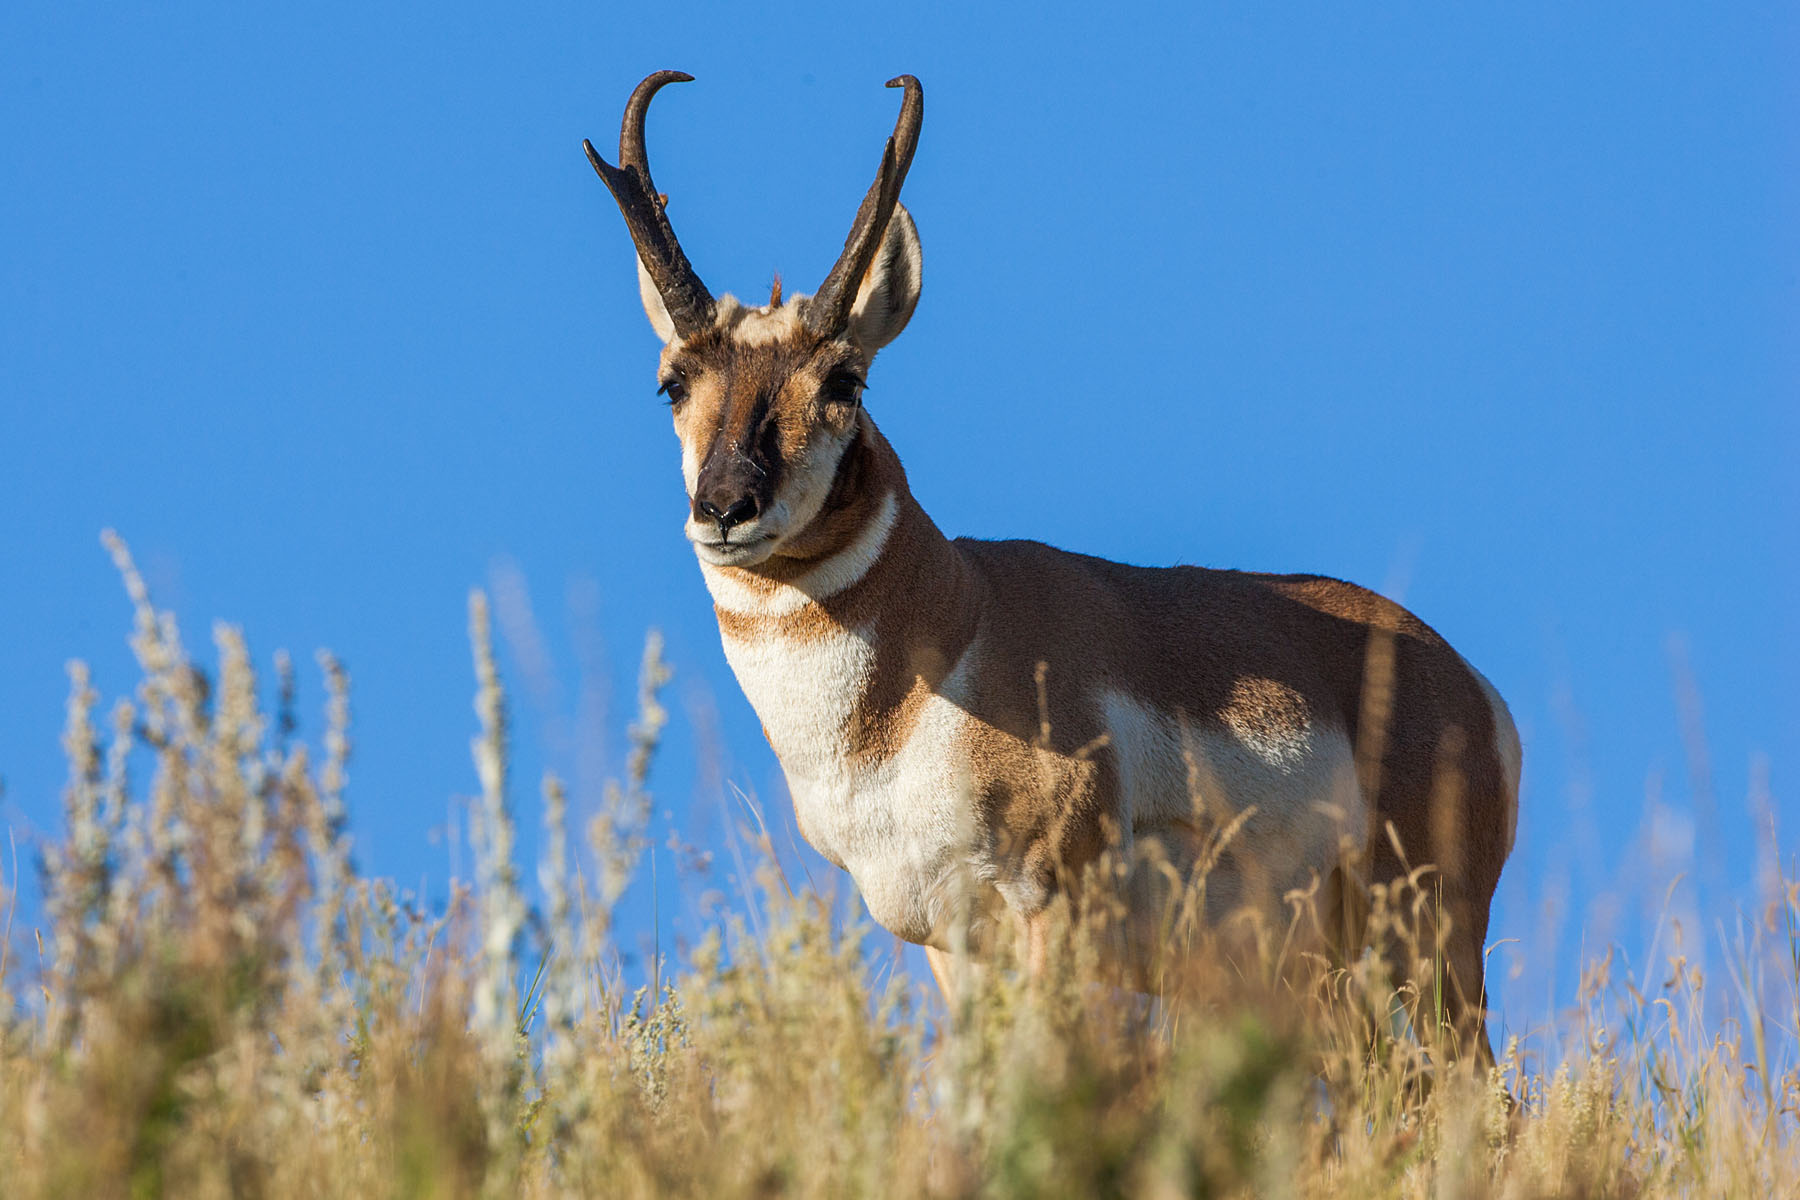 Pronghorn, Custer State Park, SD.  Click for next photo.